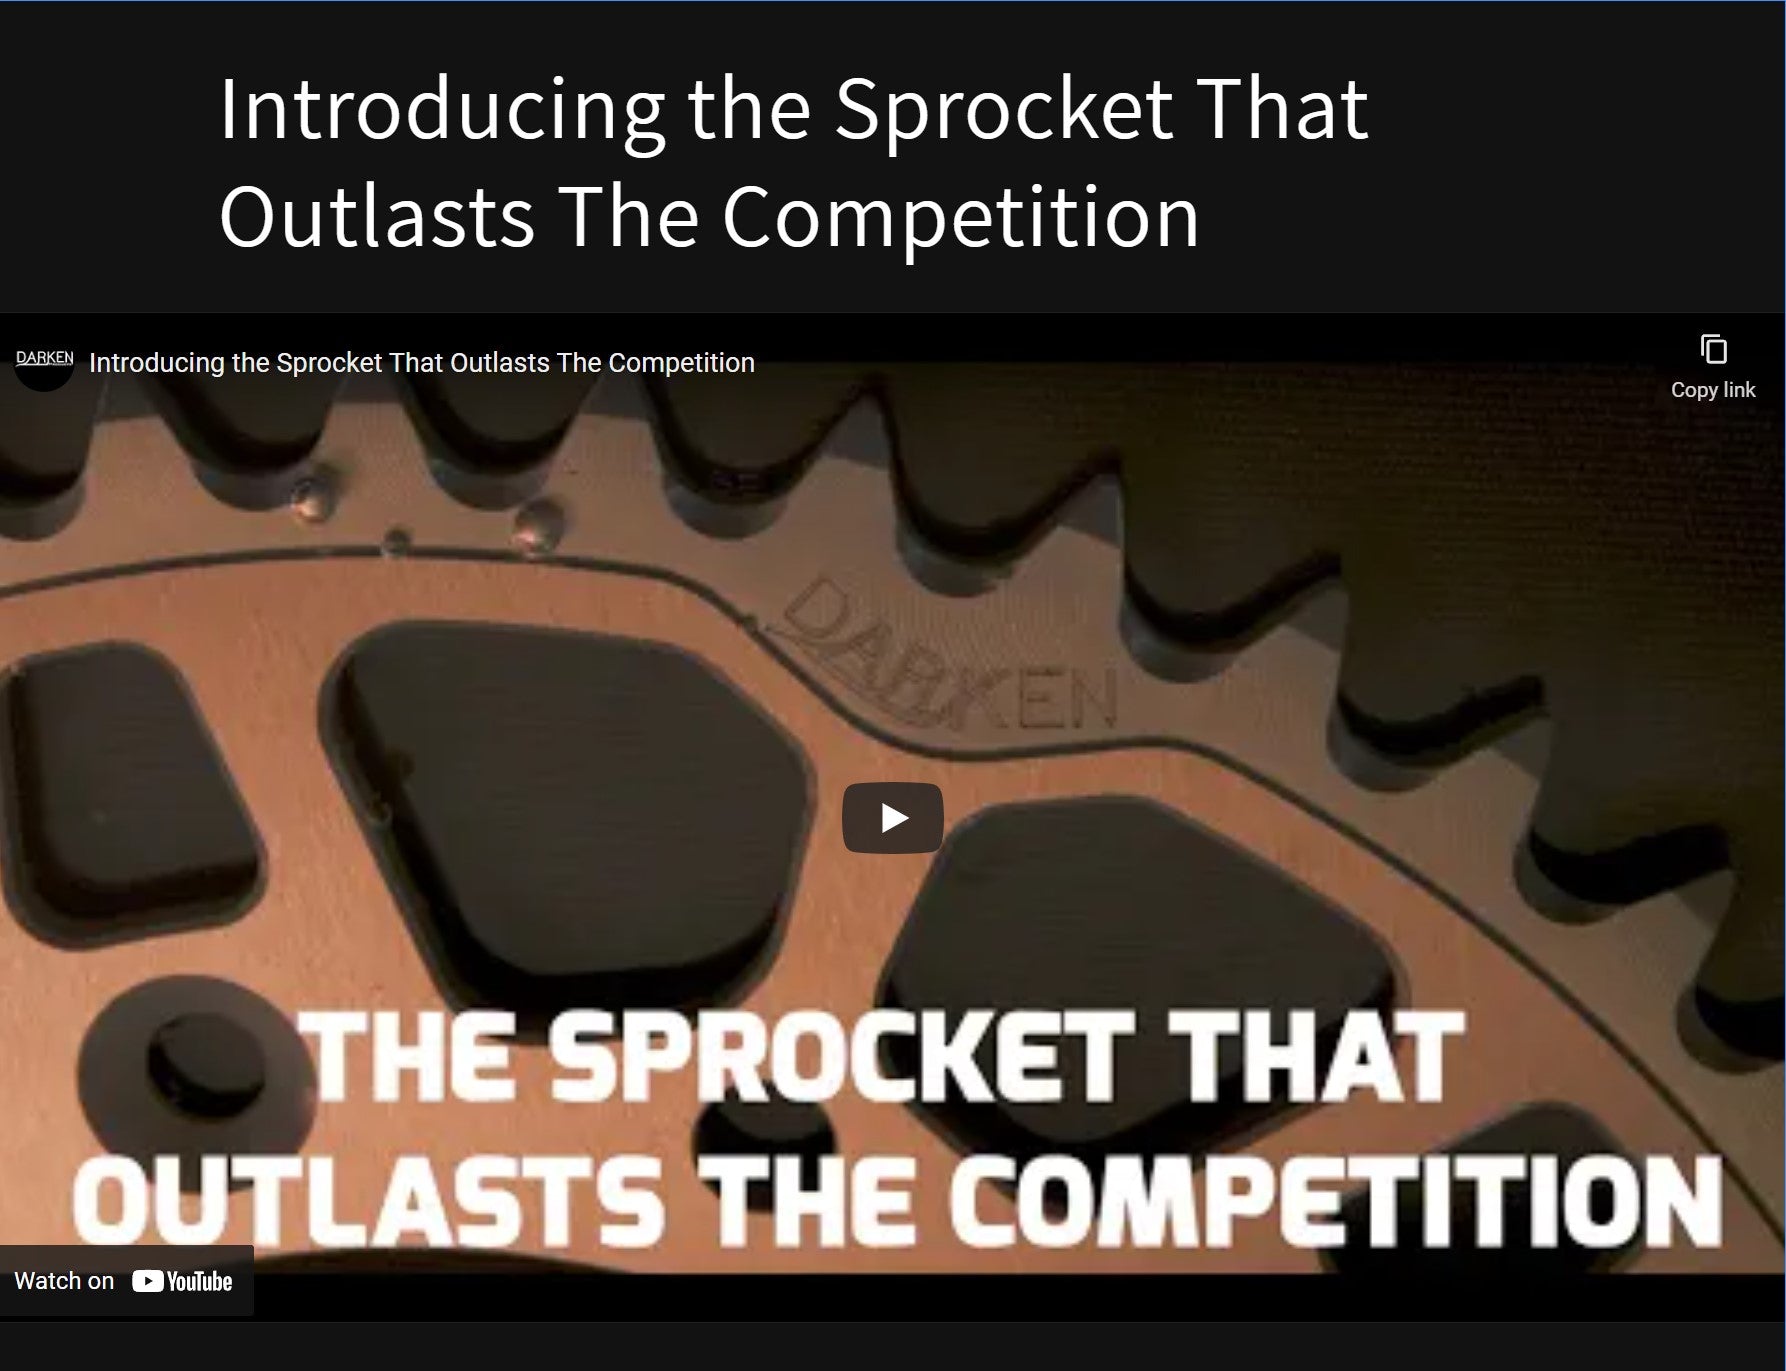 Load video: Introducing the Sprocket That Outlasts the Competition